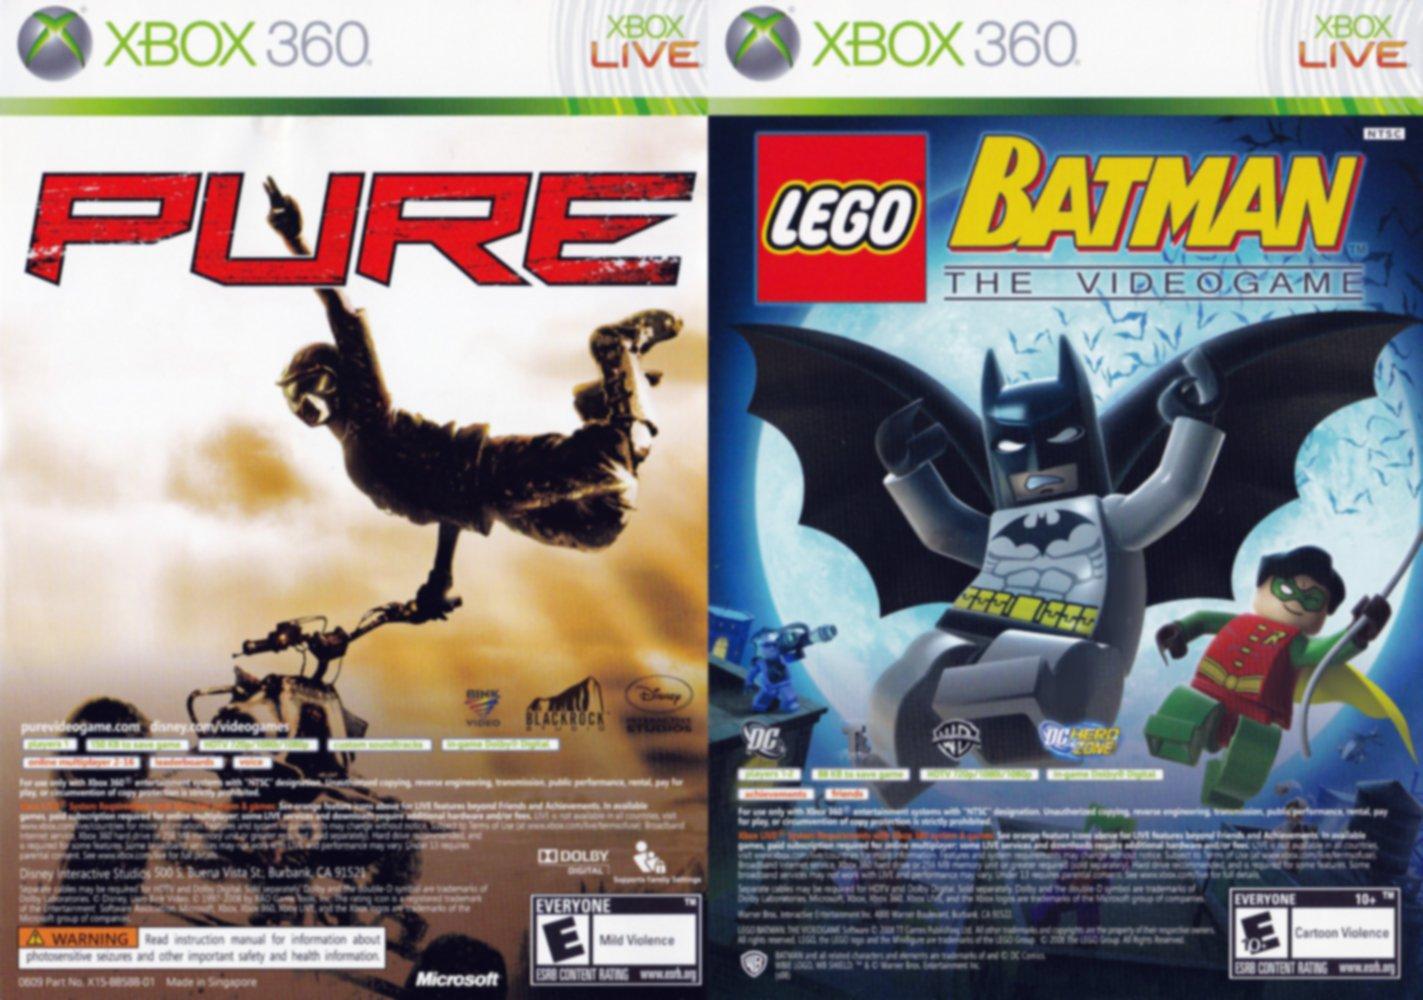 LEGO Batman: The Videogame and Pure 2 Pack - Xbox 360